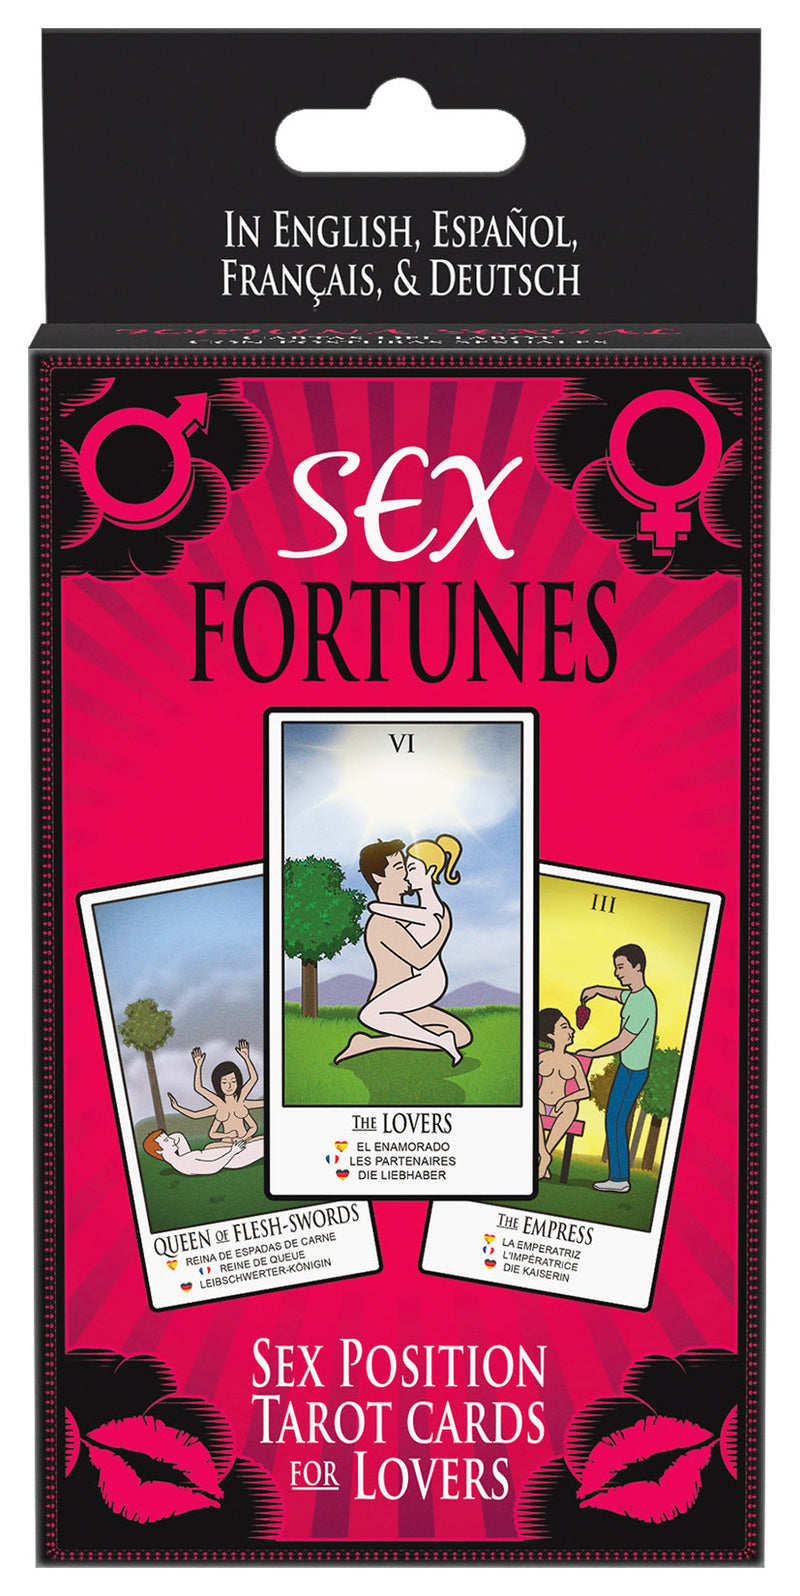 Spice Up Your Love Life with Flirty Sex Fortunes Game - 78 Cards to Predict and Act Out Your Lover&